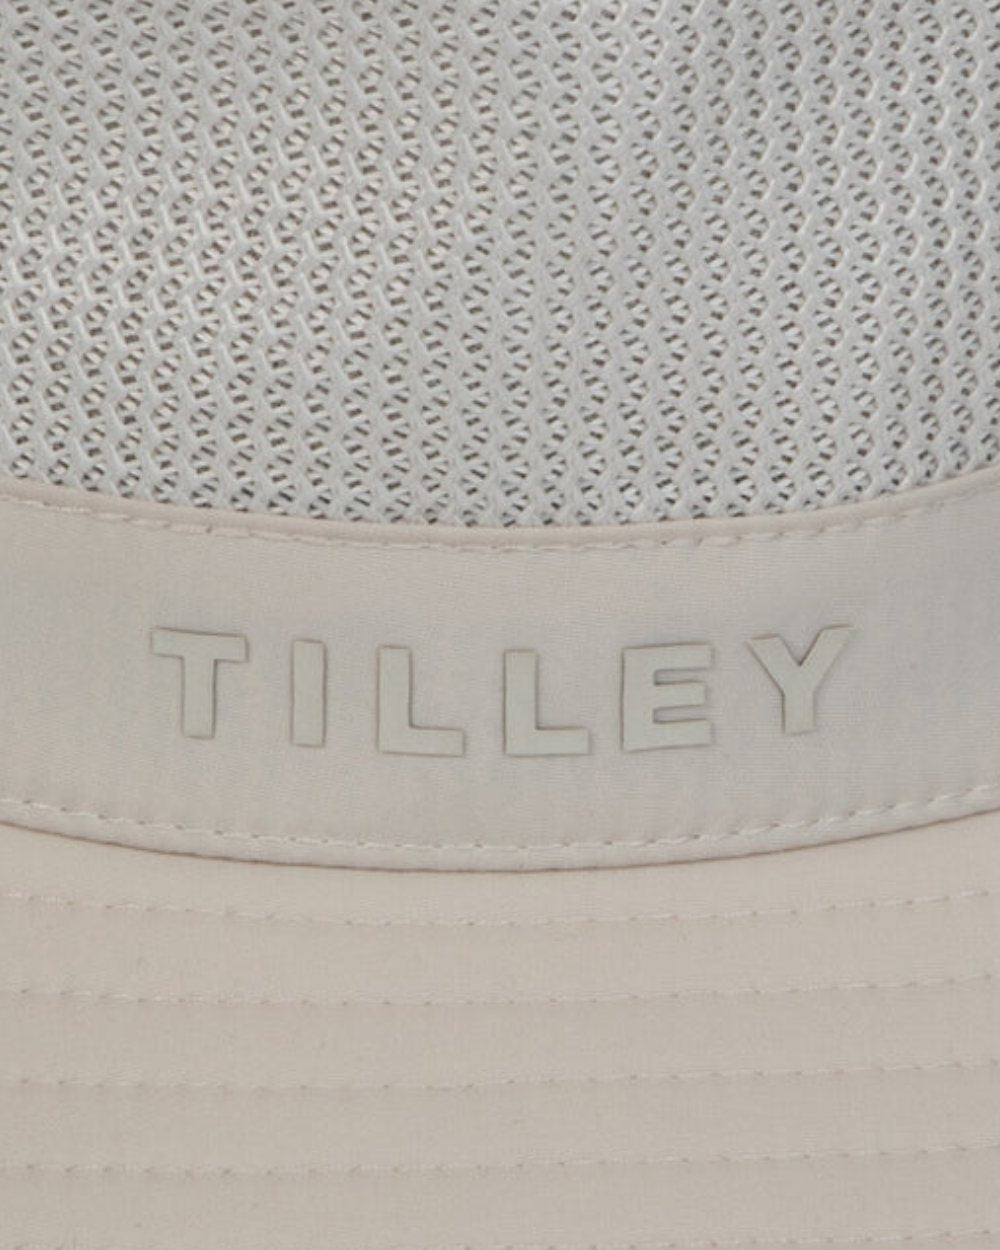 Light Stone Coloured Tilley Hat LTM1 Airflo Bucket On A White Background 